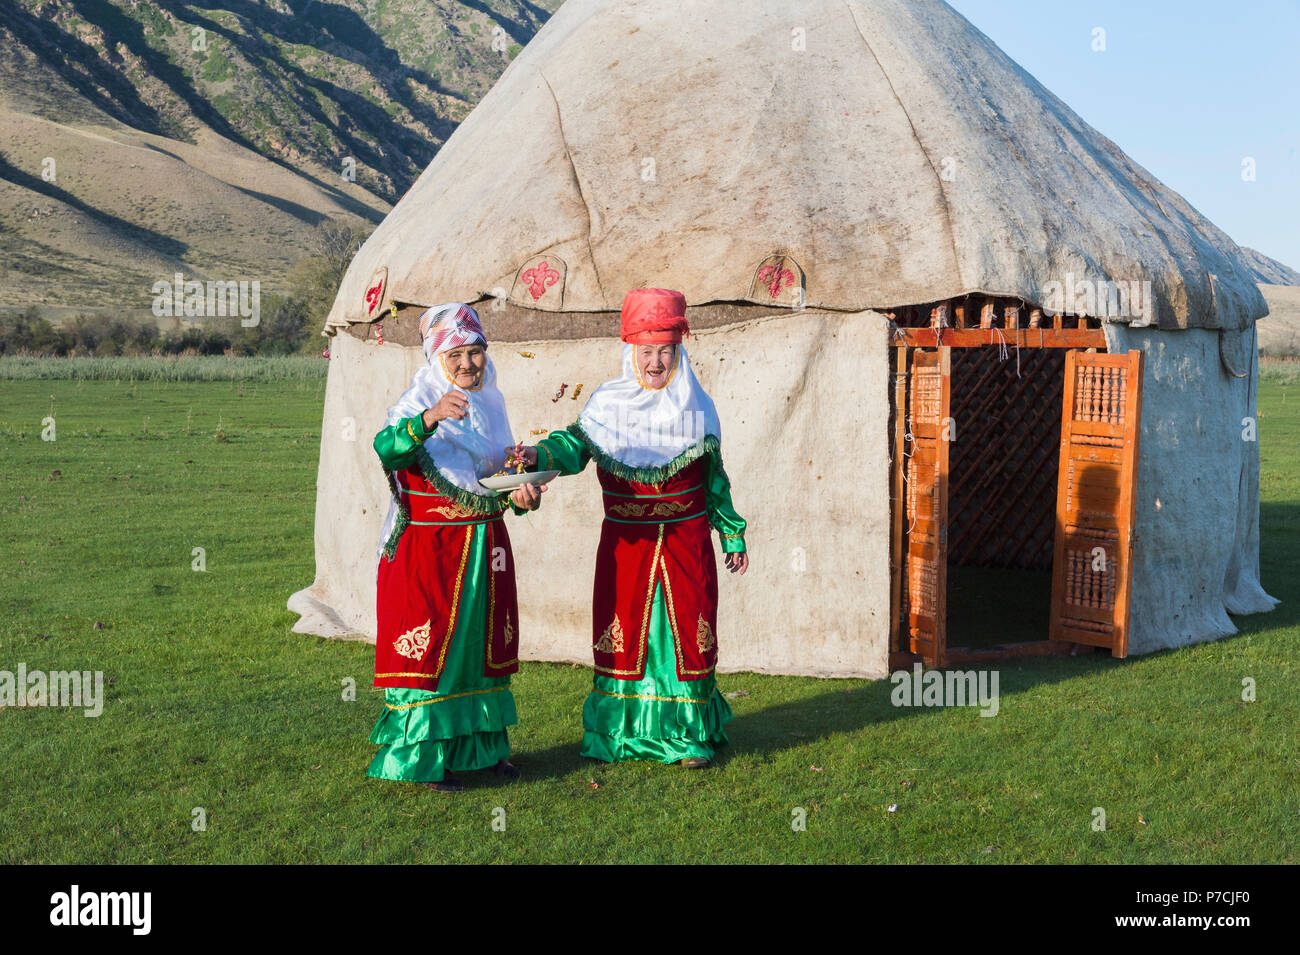 Two Kazakh women in traditional clothes, in front of  yurt, welcoming guests, For editorial Use only, Sati village, Tien Shan Mountains, Kazakhstan Stock Photo